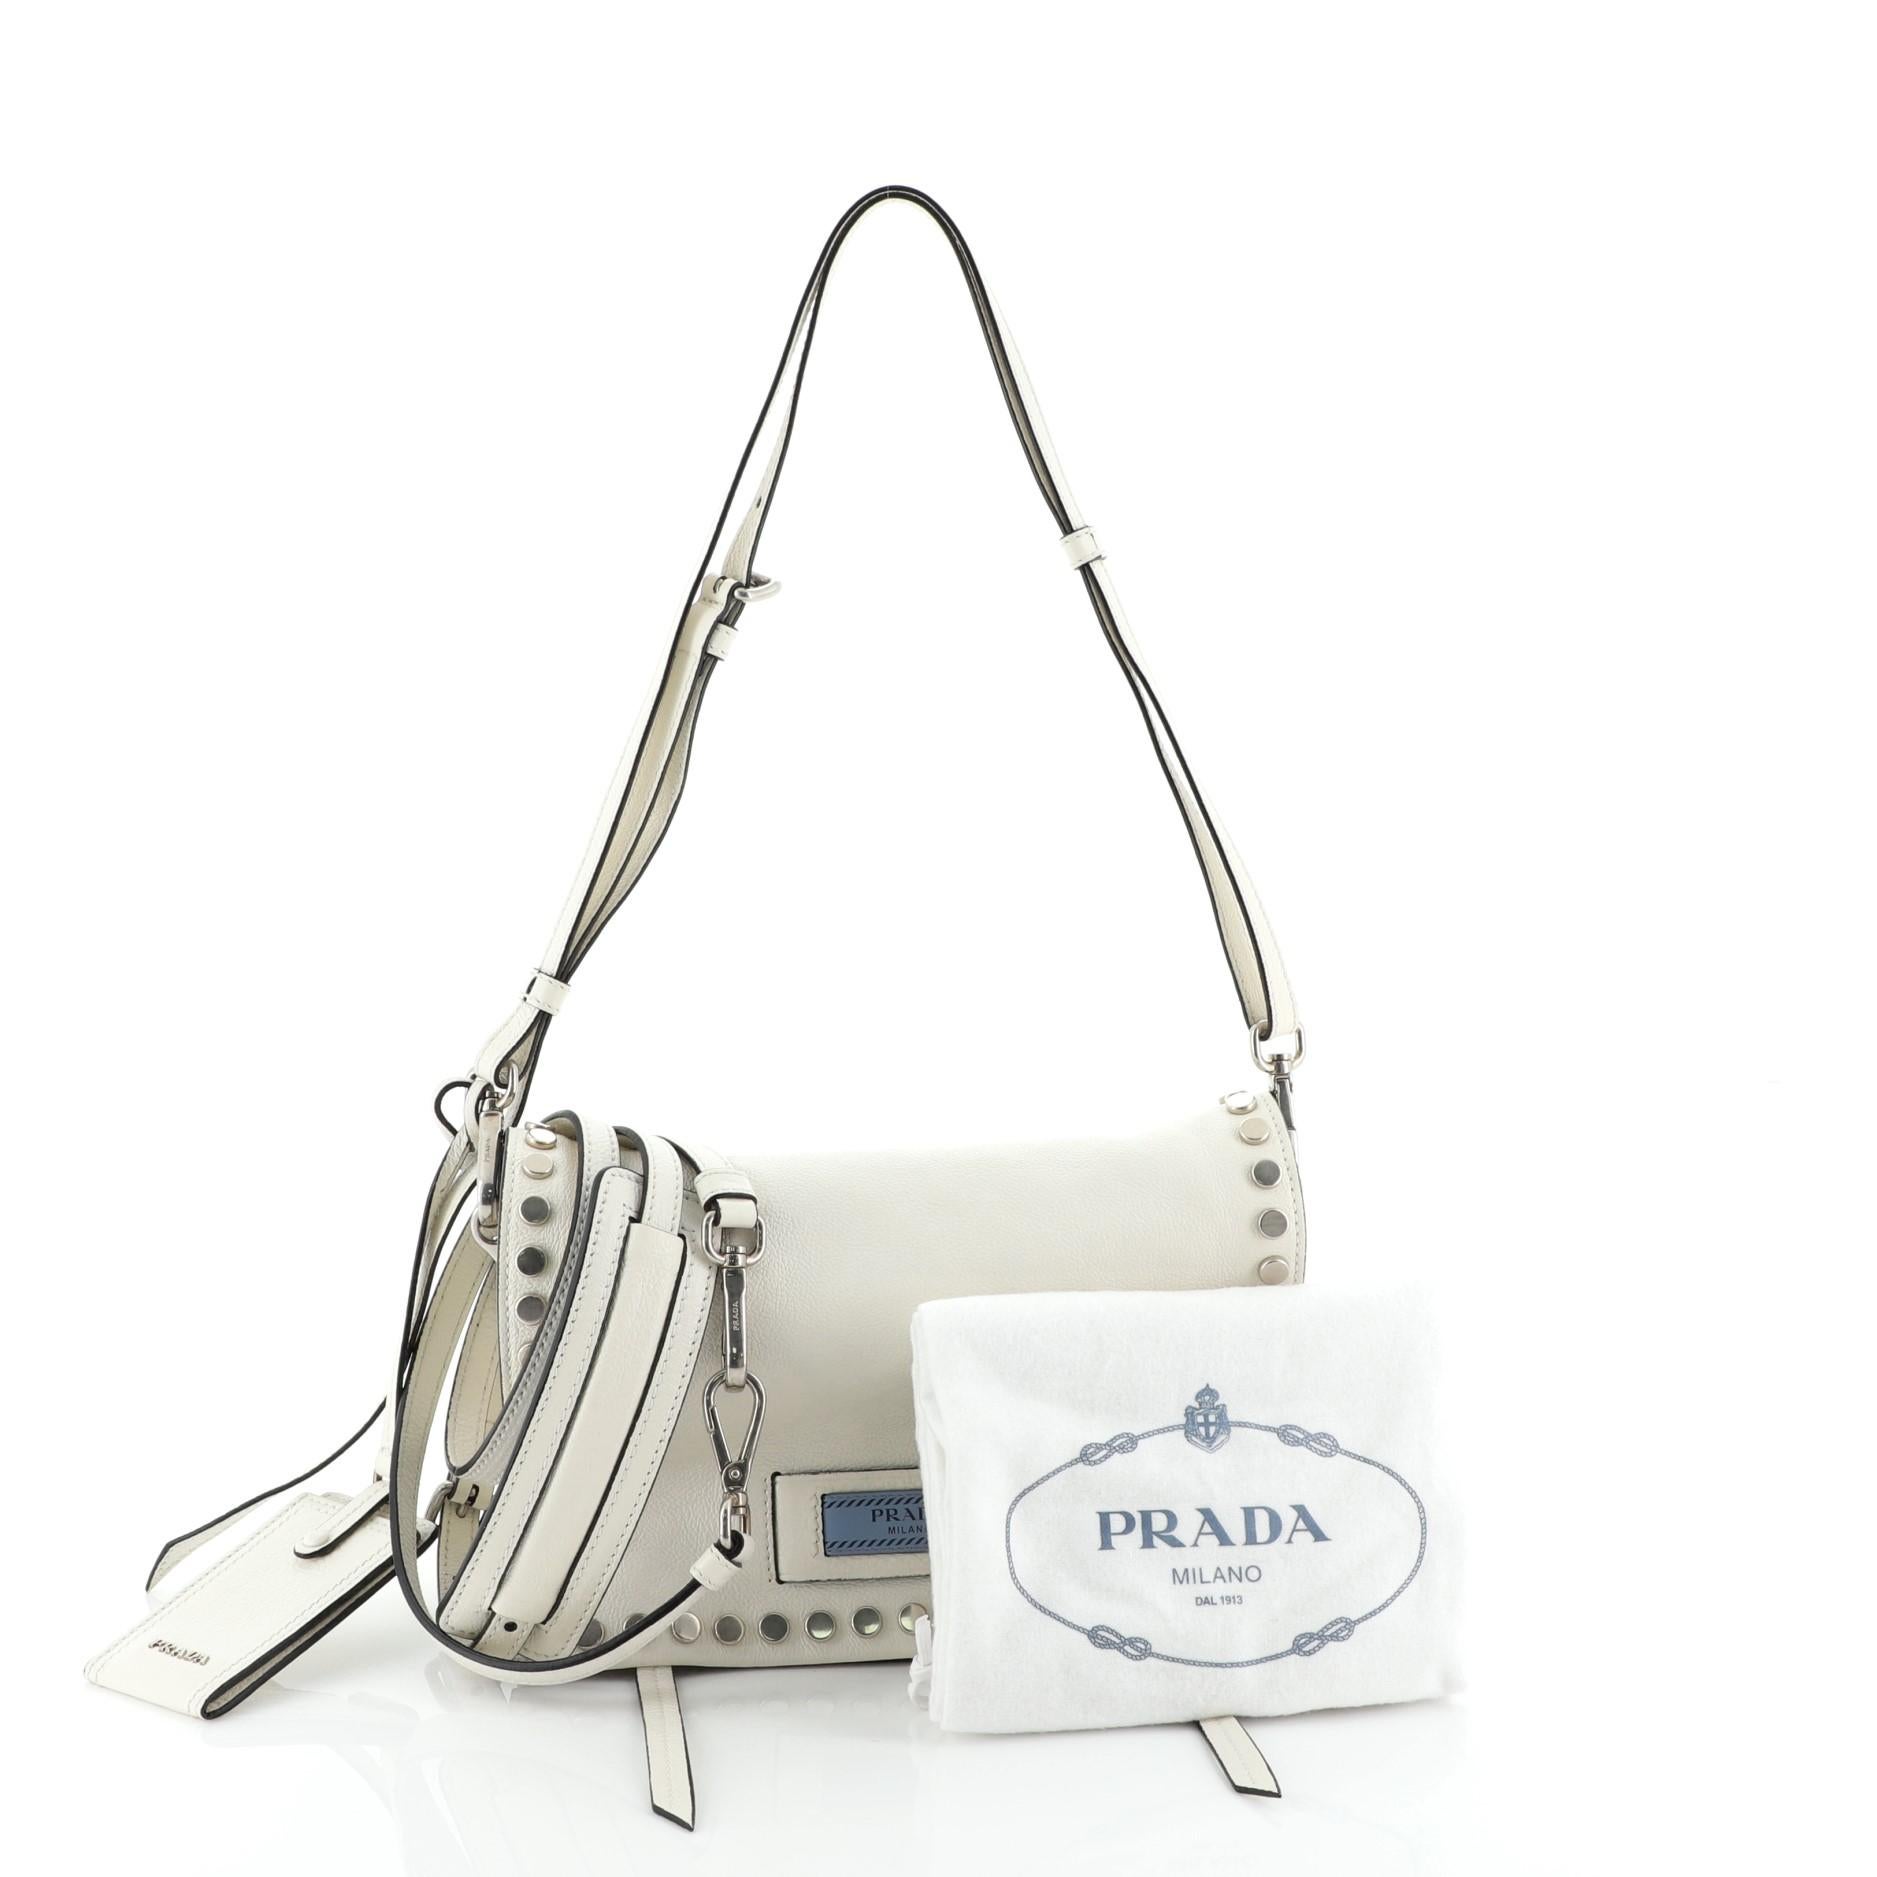 This Prada Etiquette Flap Bag Studded Glace Calfskin Small, crafted from white glace calfskin leather with disc studs, features a detachable shoulder strap, two side zip compartments, and silver-tone hardware. It opens to a blue suede interior